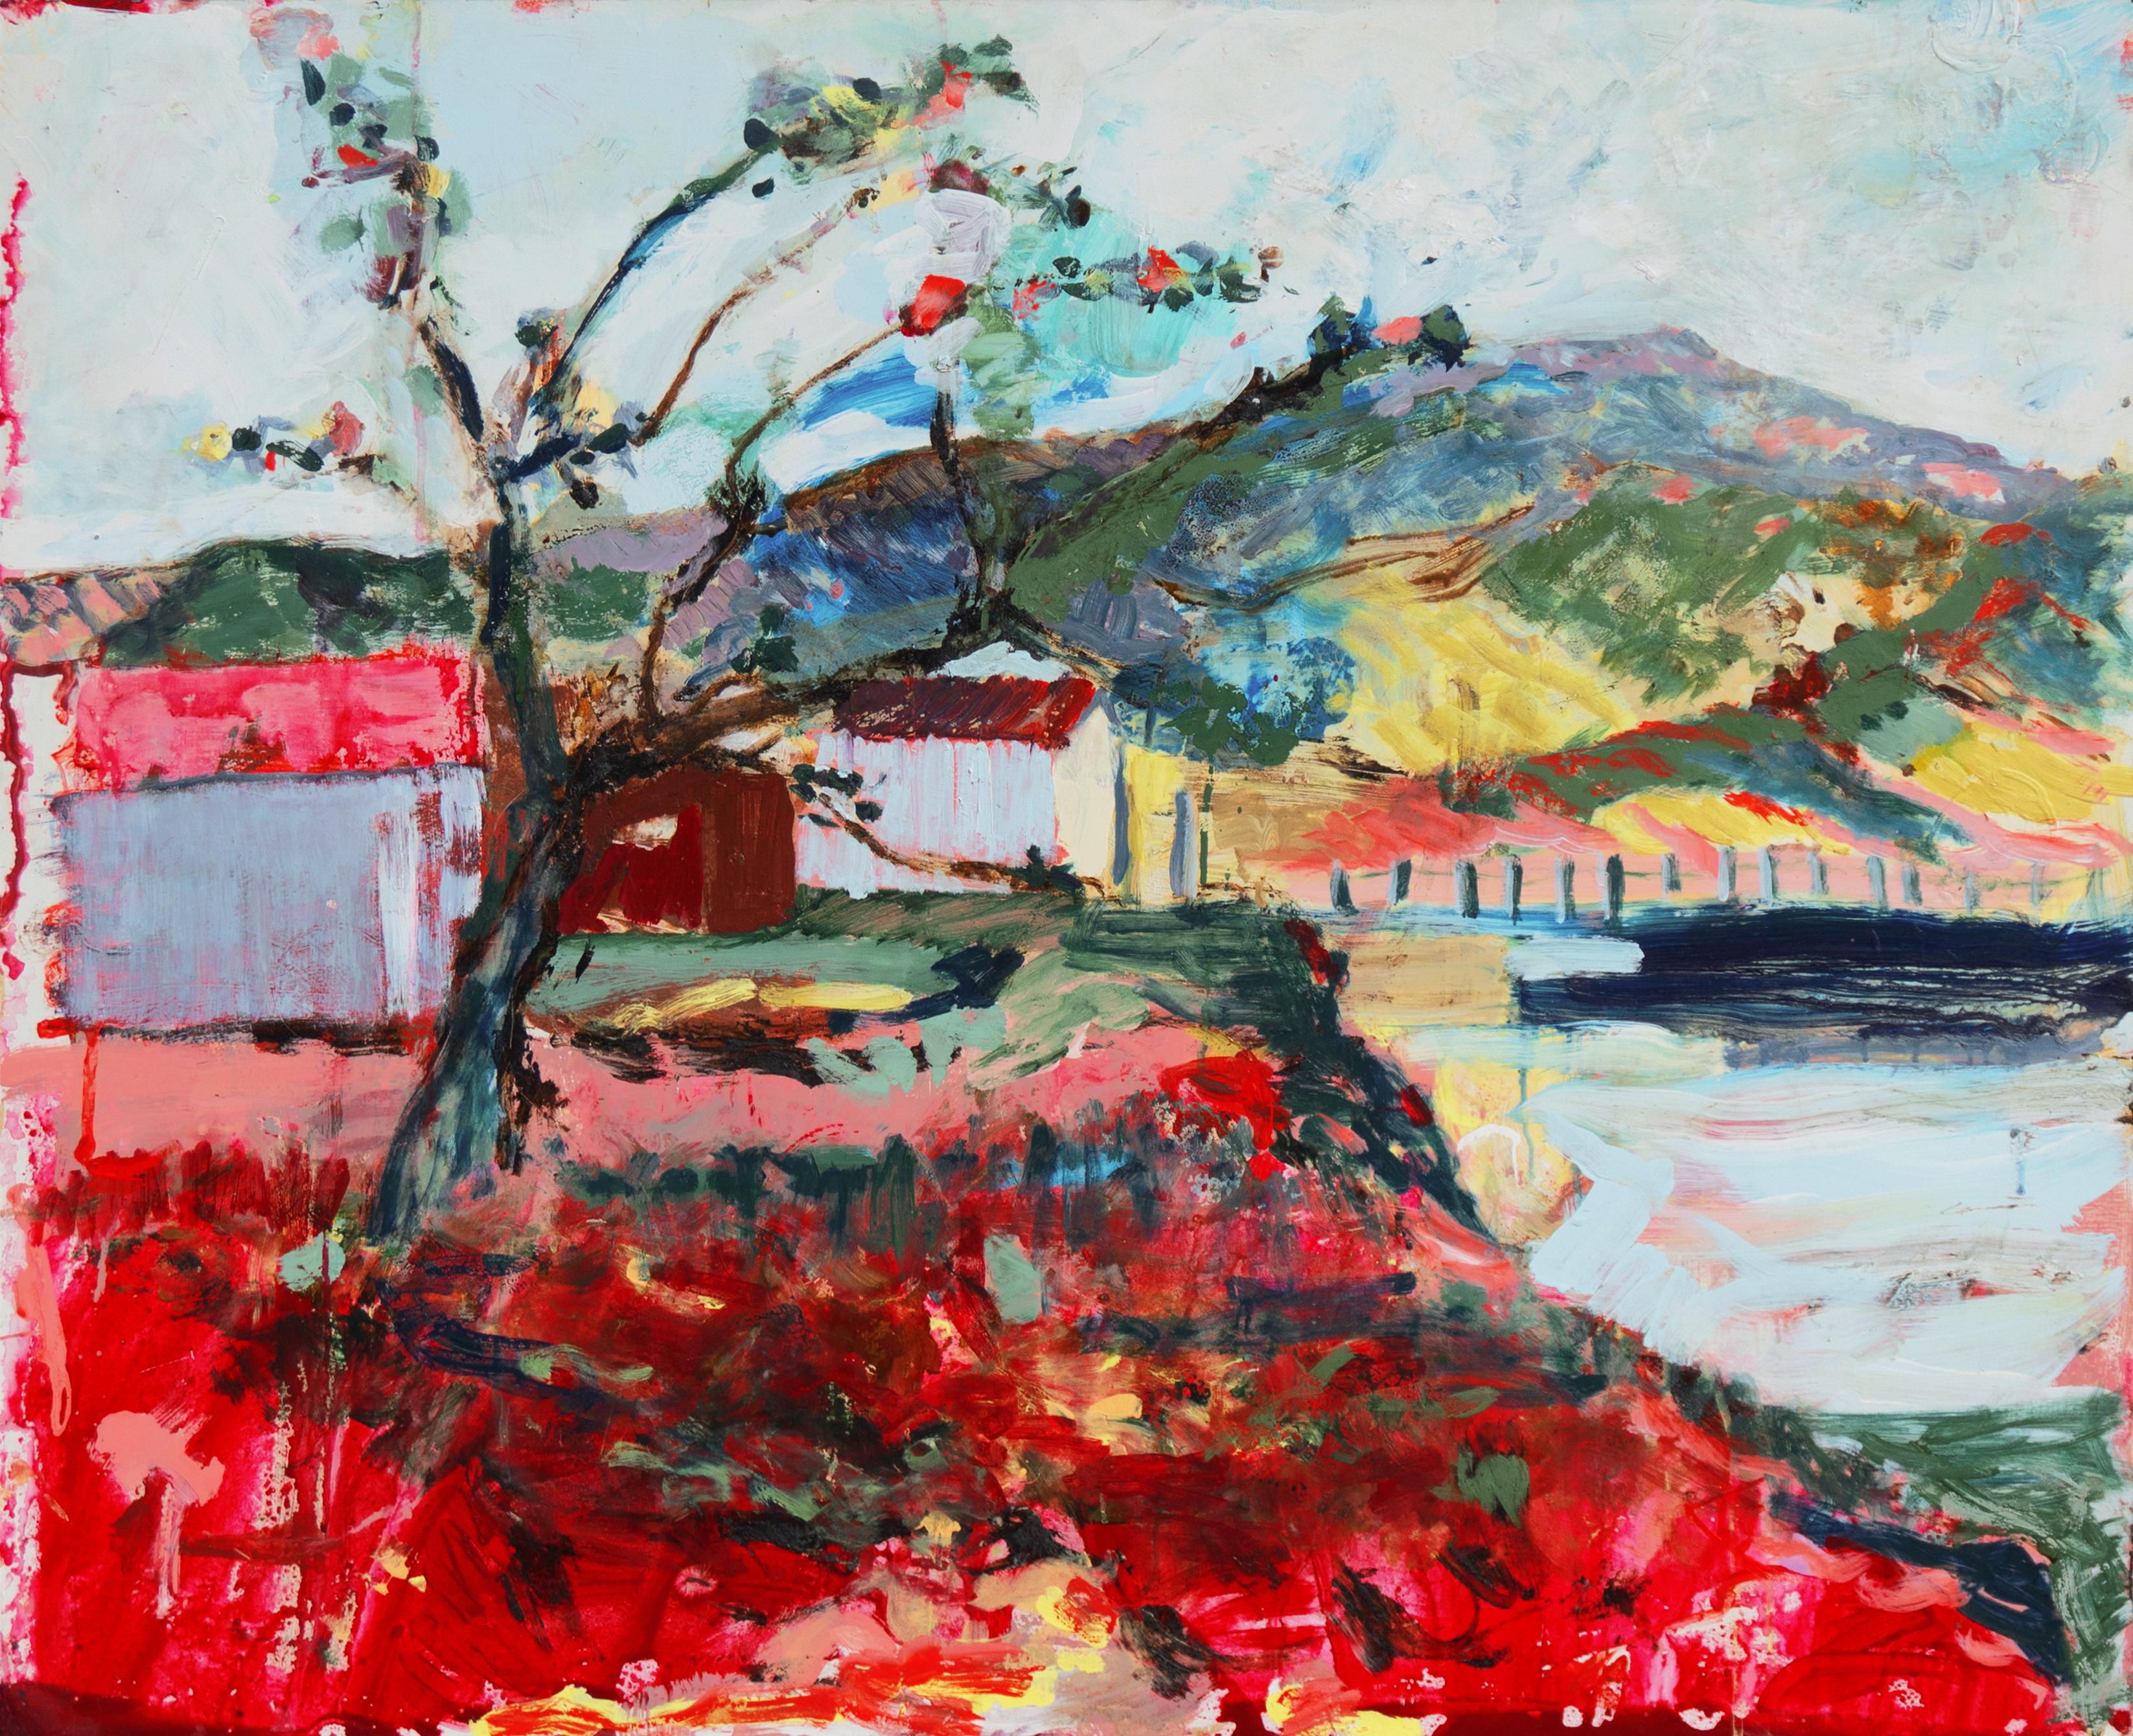 'Hills of Marin', Large American Expressionist, Carmel, Stanford, San Francisco